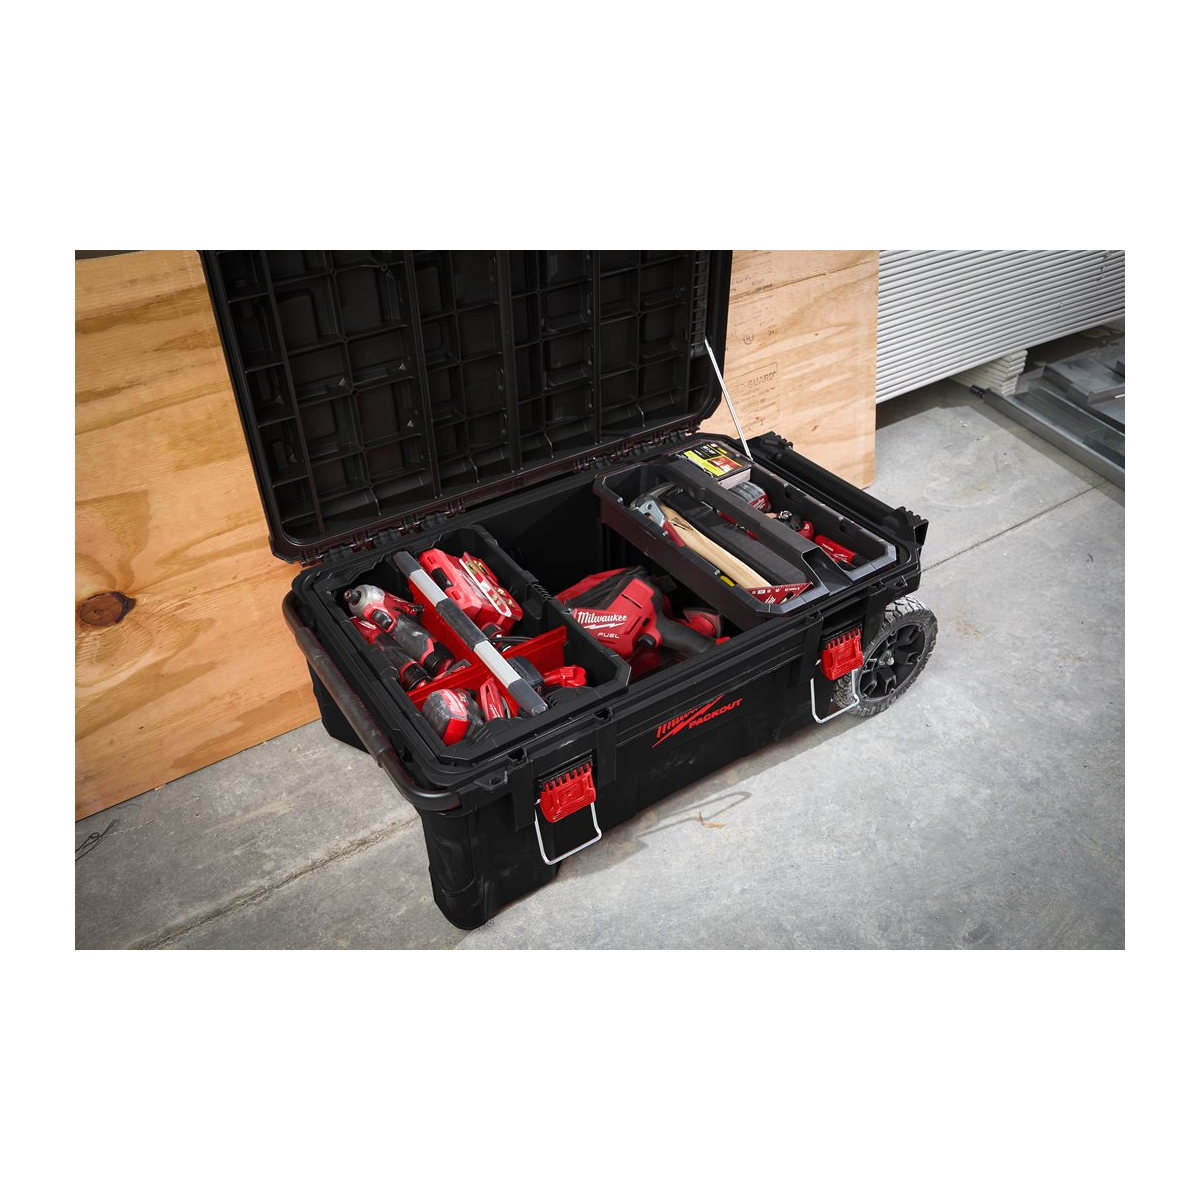 Caisse à Outils PACKOUT MILWAUKEE 4932471724 : Organisation Efficace